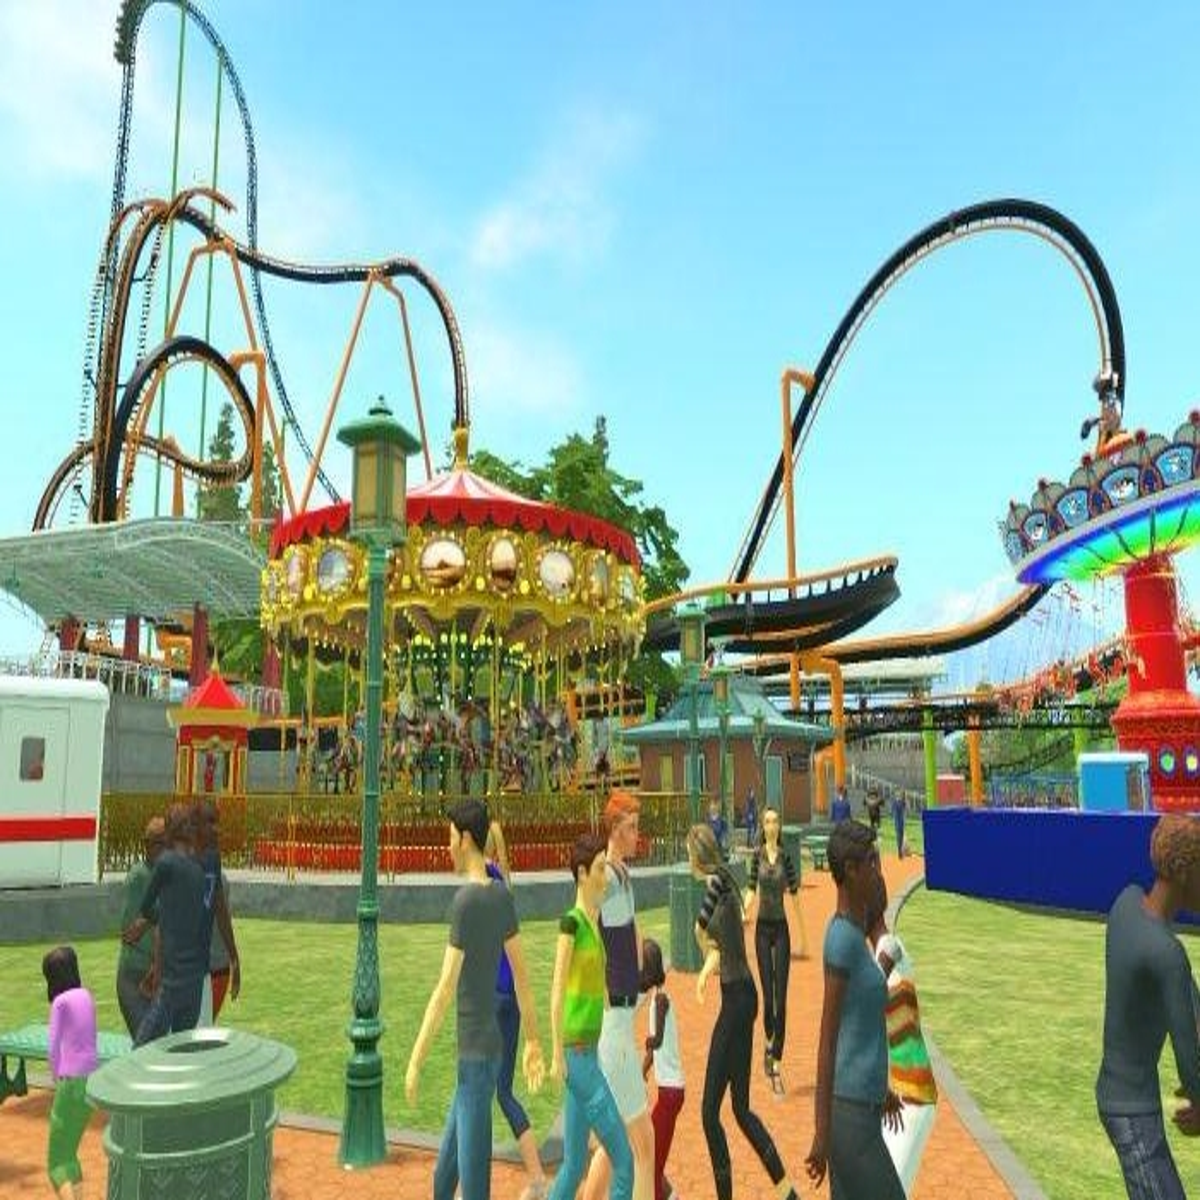 Home - RollerCoaster Tycoon - The Ultimate Theme park Sim